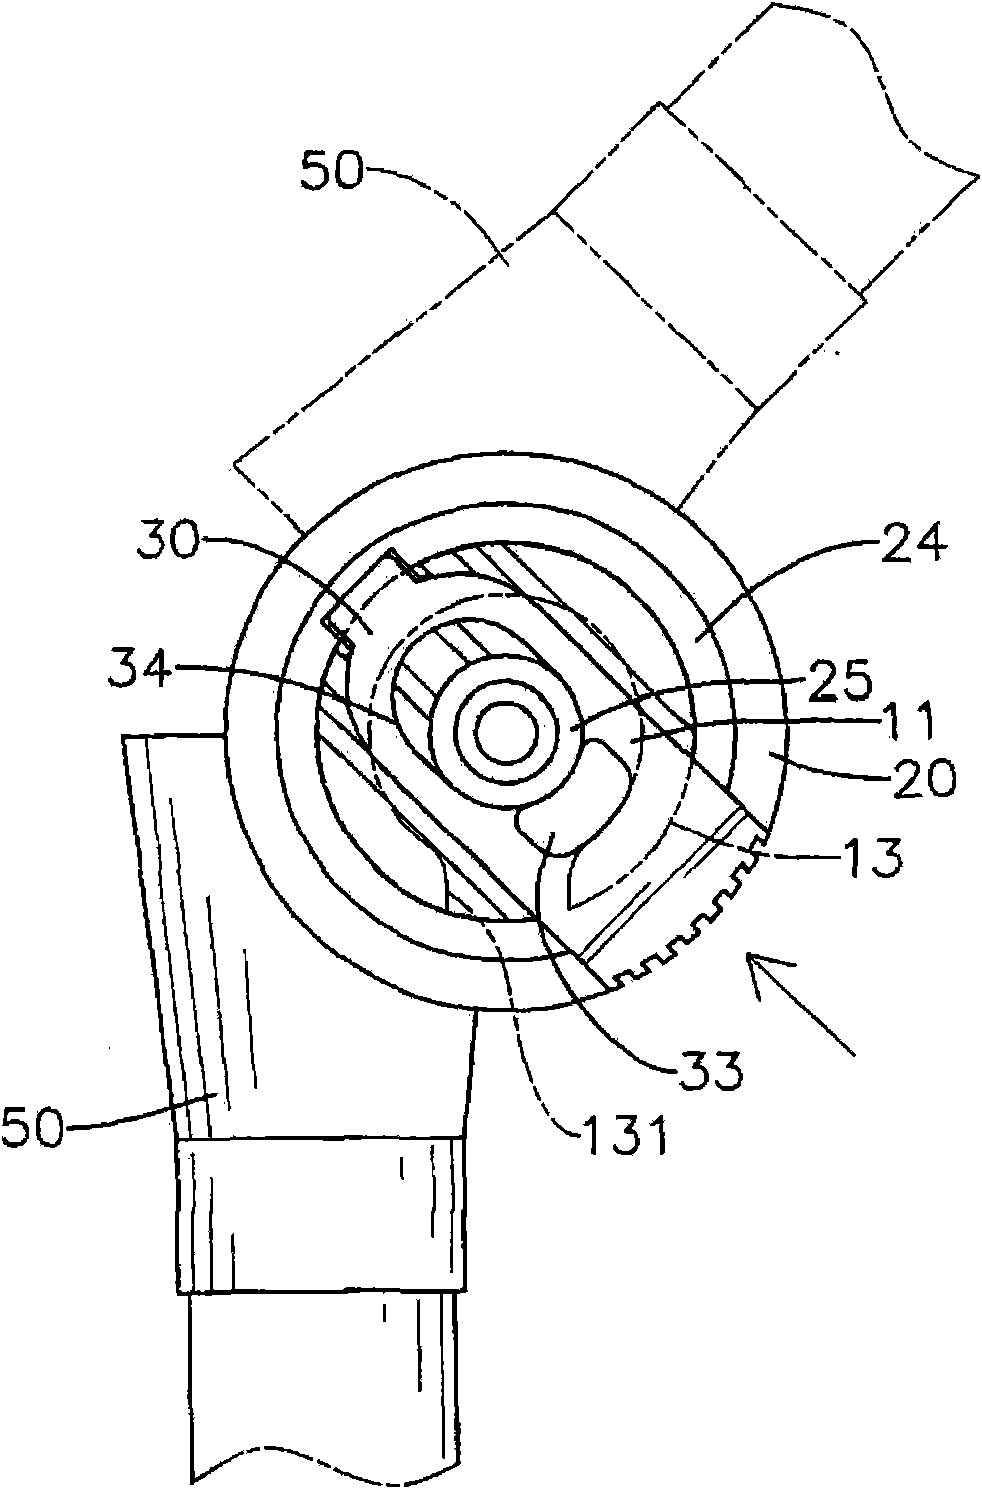 Joint device